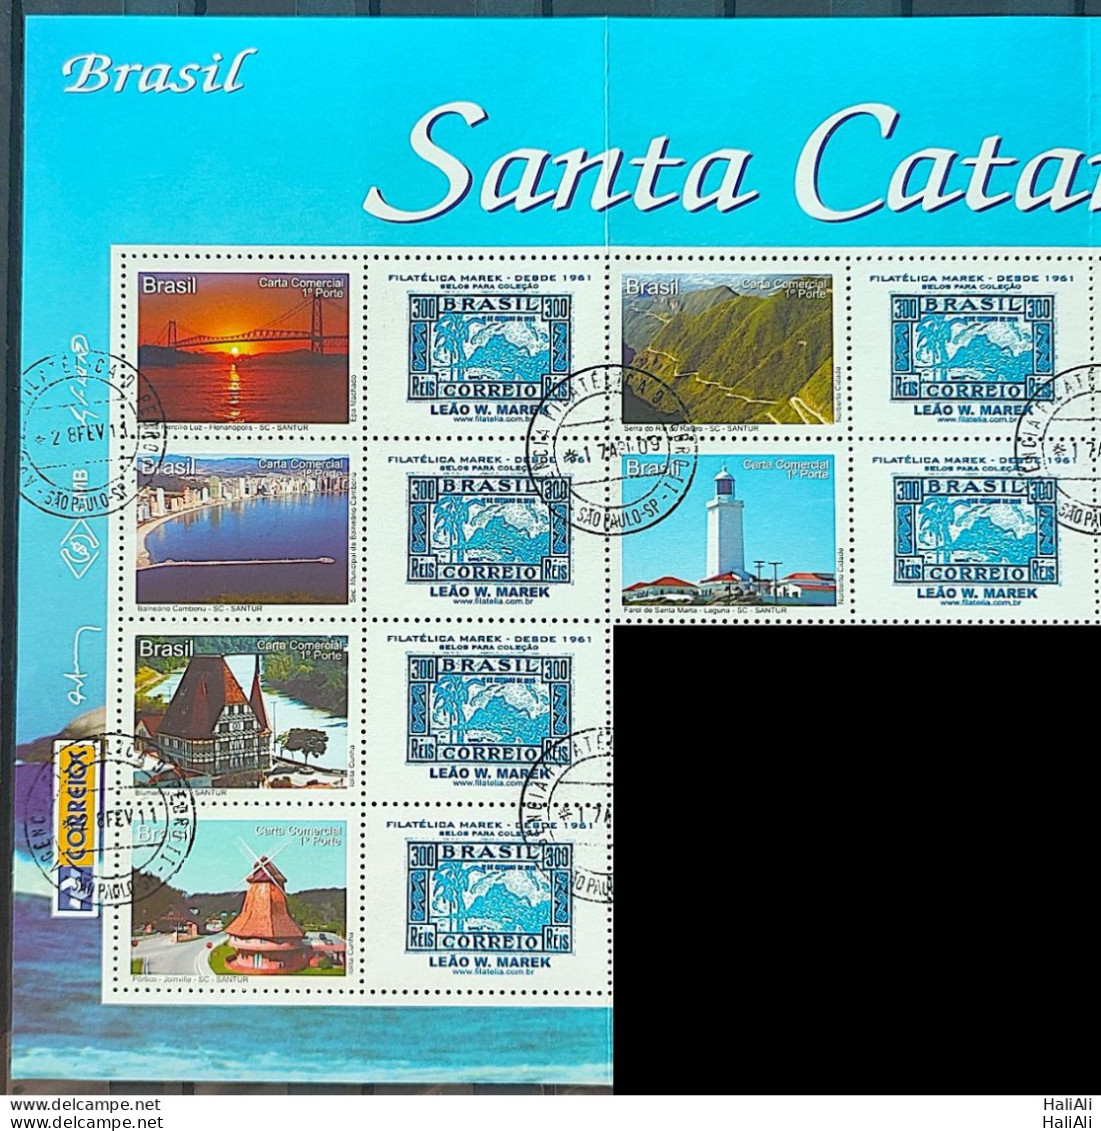 C 2783 Brazil Personalized Stamp Santa Catarina 2009 CPD SP Left Side Od The Sheet Very Rare - Personnalisés